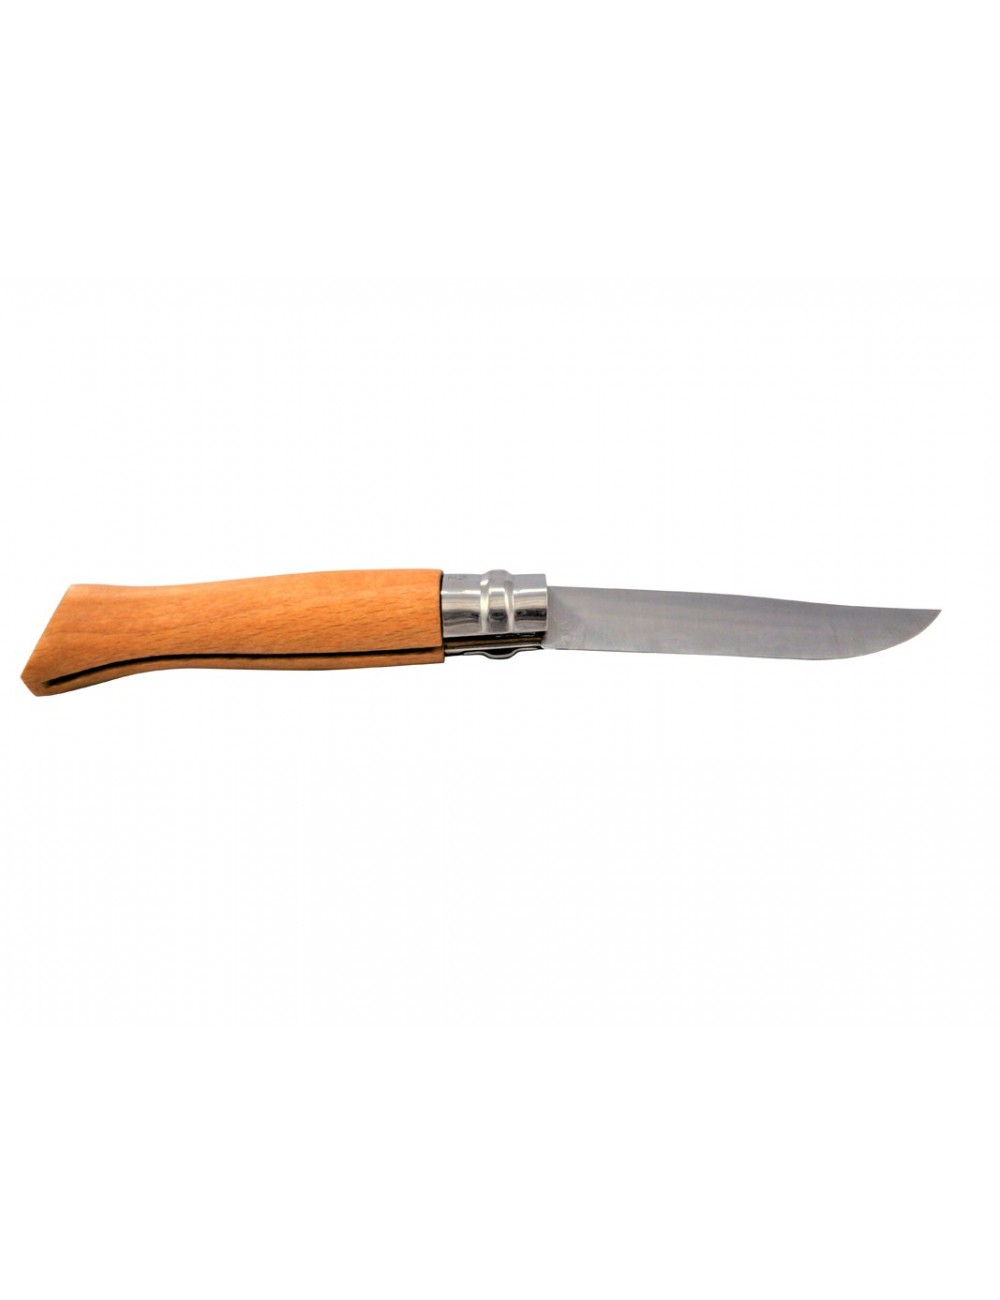 OPINEL NO. 9 KNIFE - STAINLESS STEEL - PURCHASE OF KITCHEN UTENSILS